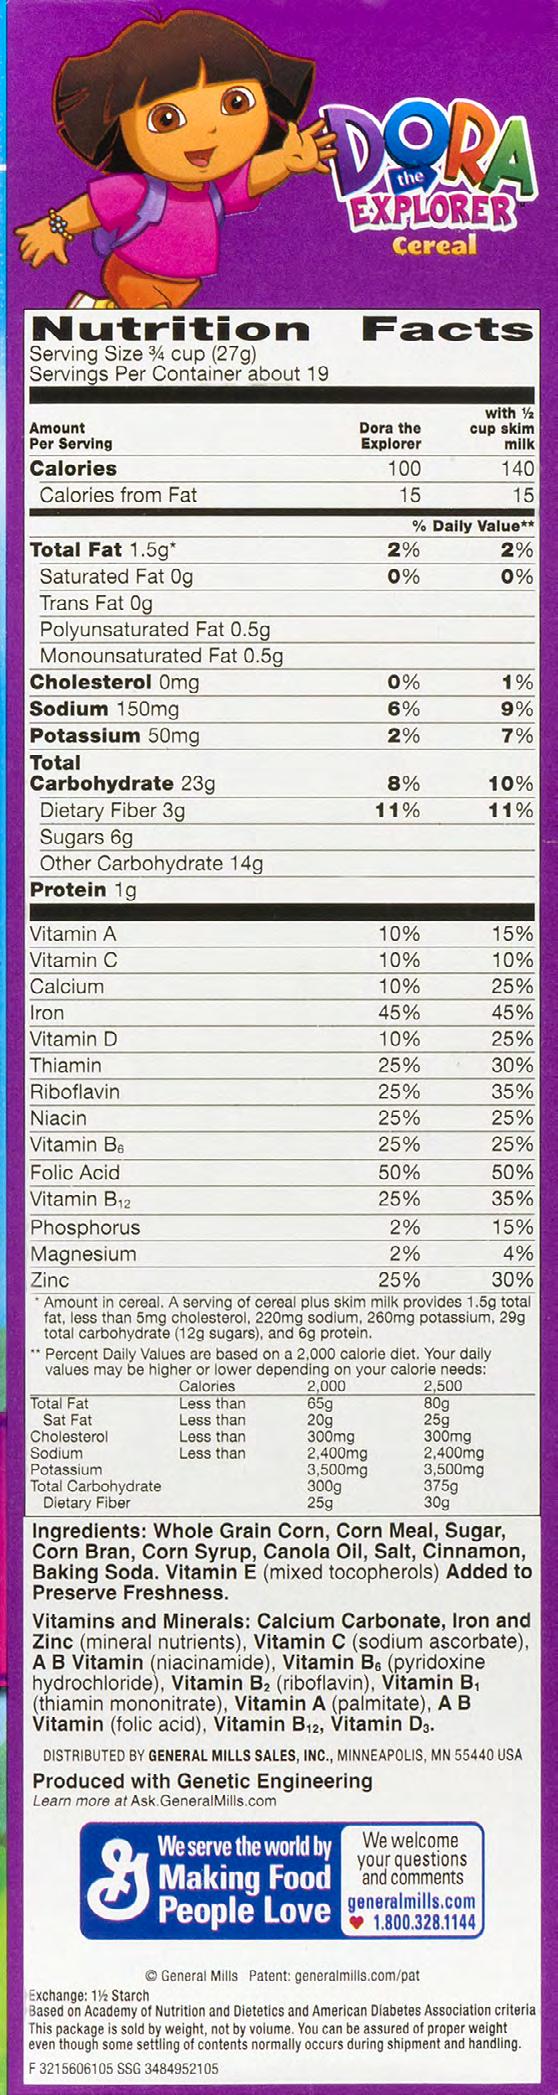 content per dry ounce. 1) Find the serving size in grams at the top of the label and the sugars listed towards the middle.